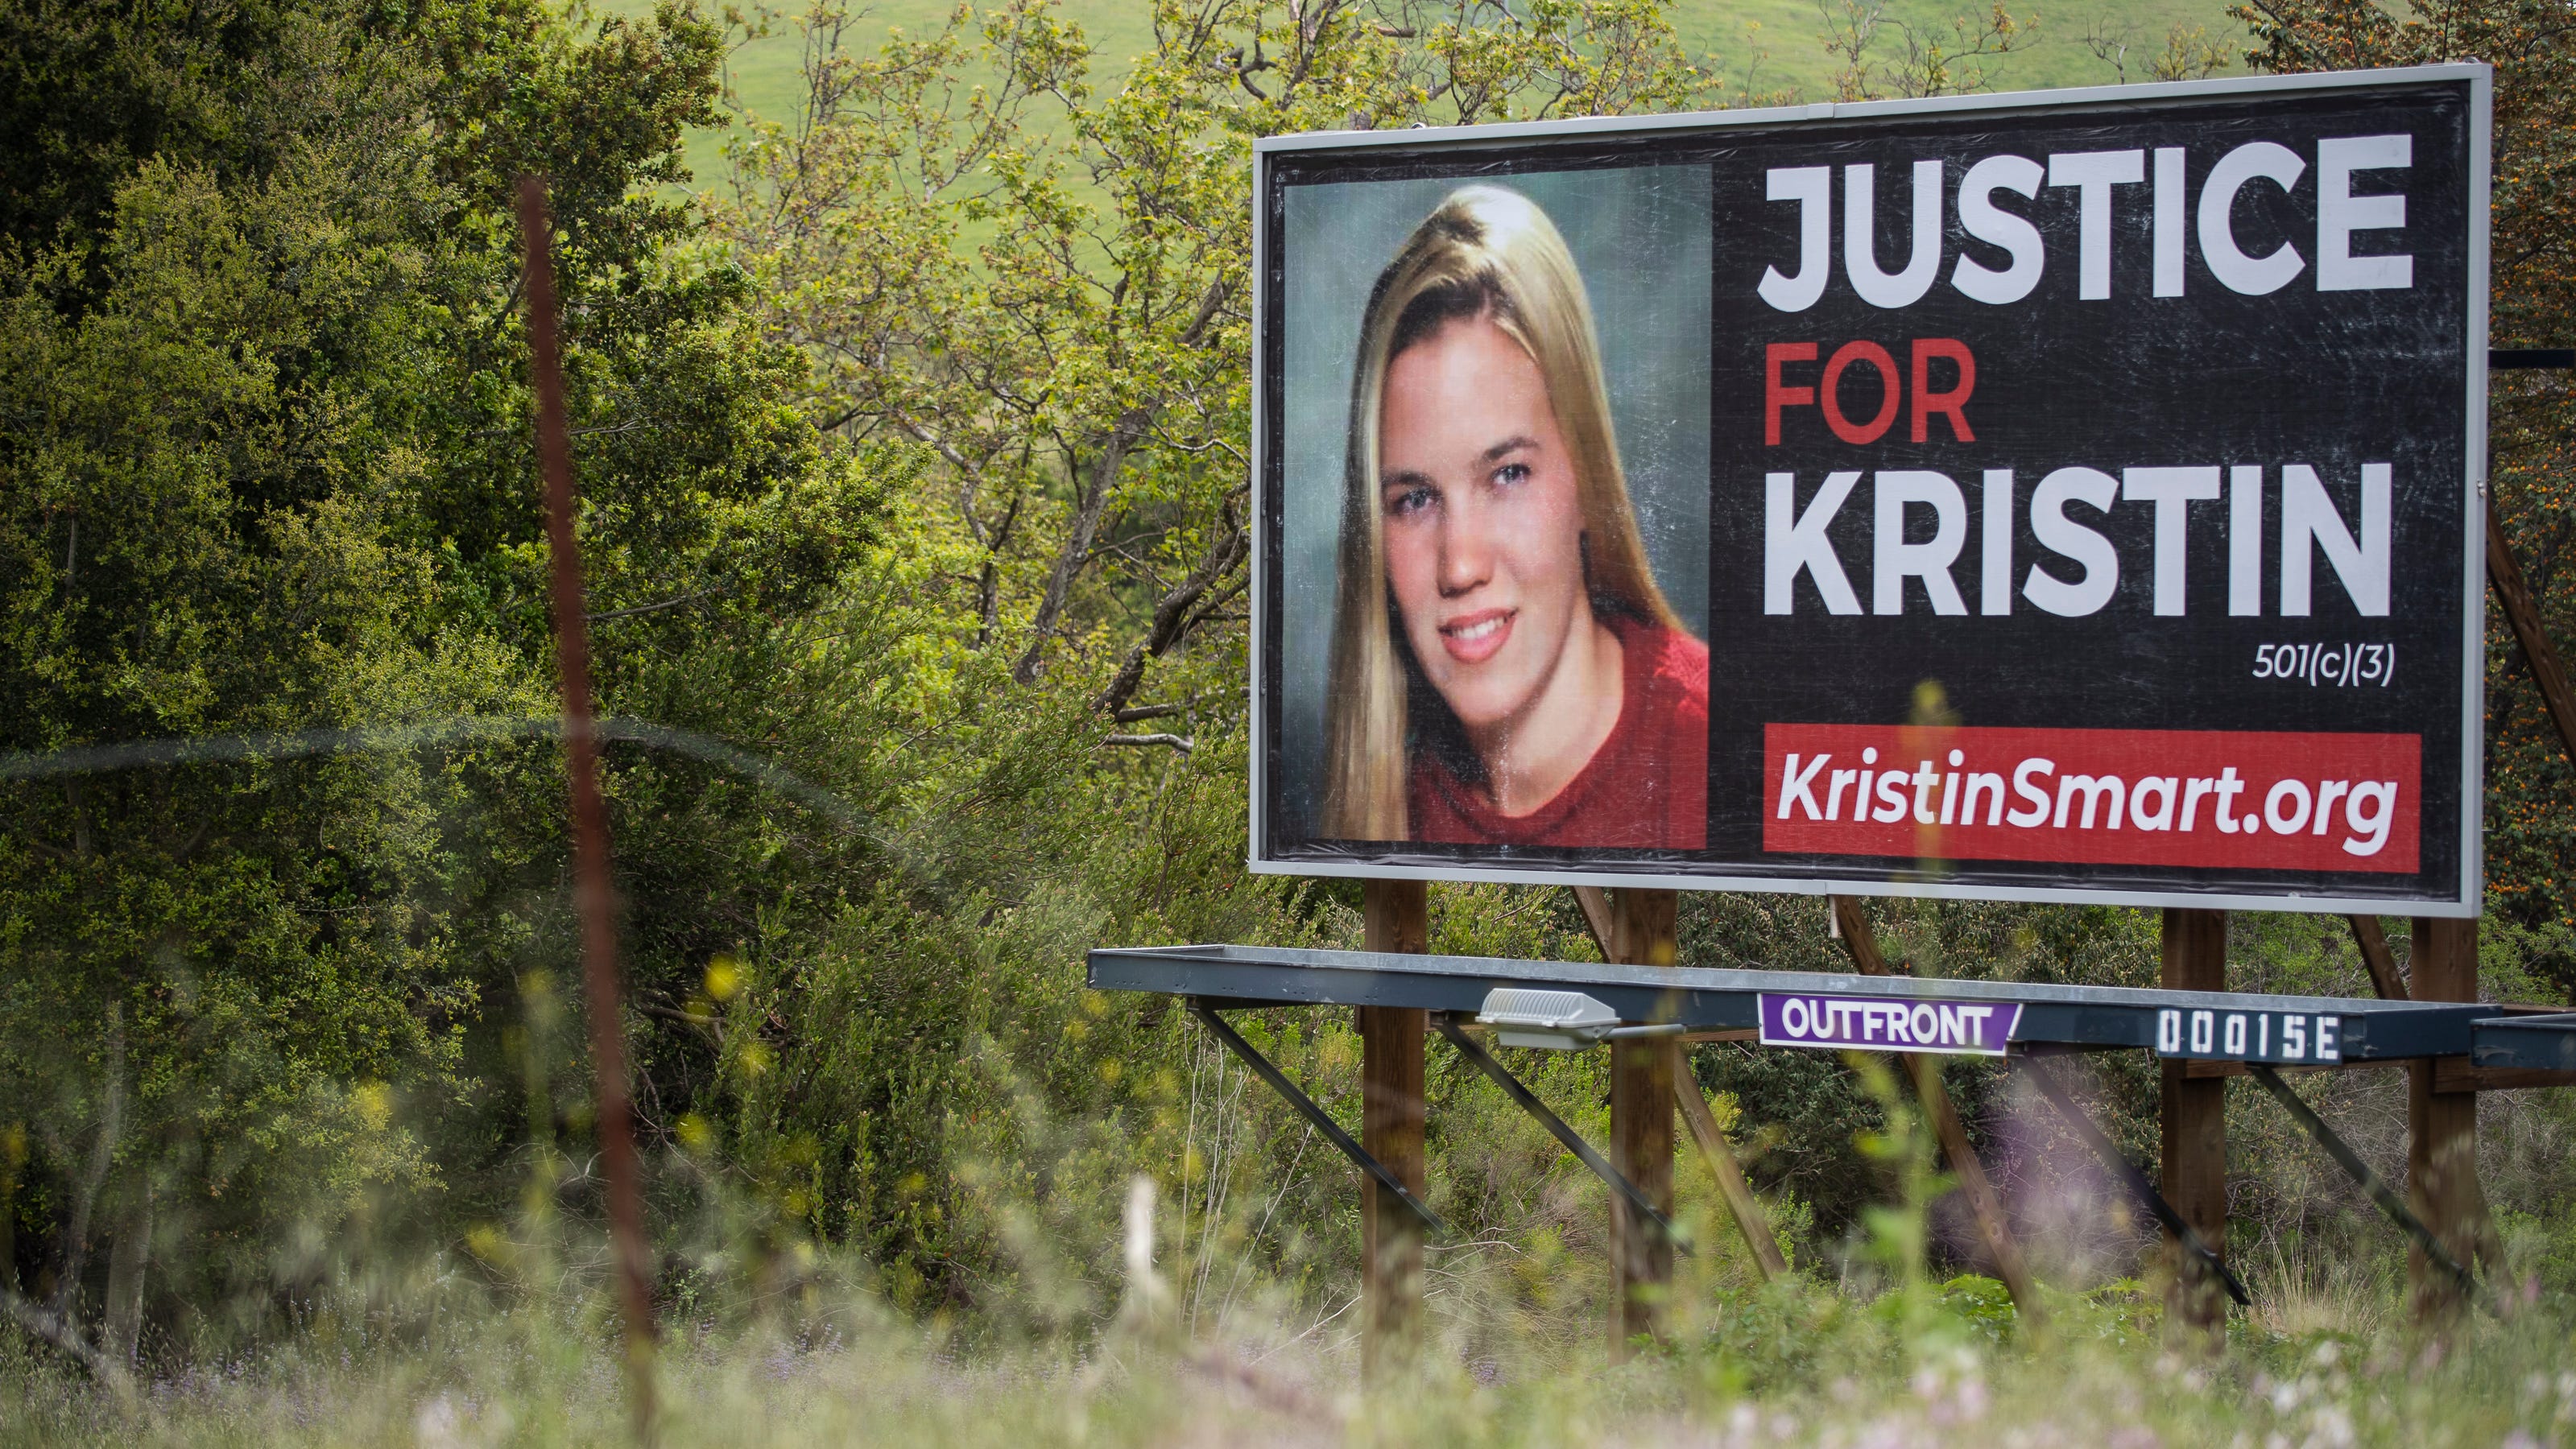 Missing Cal Poly student Kristin Smart was happy, always smiling